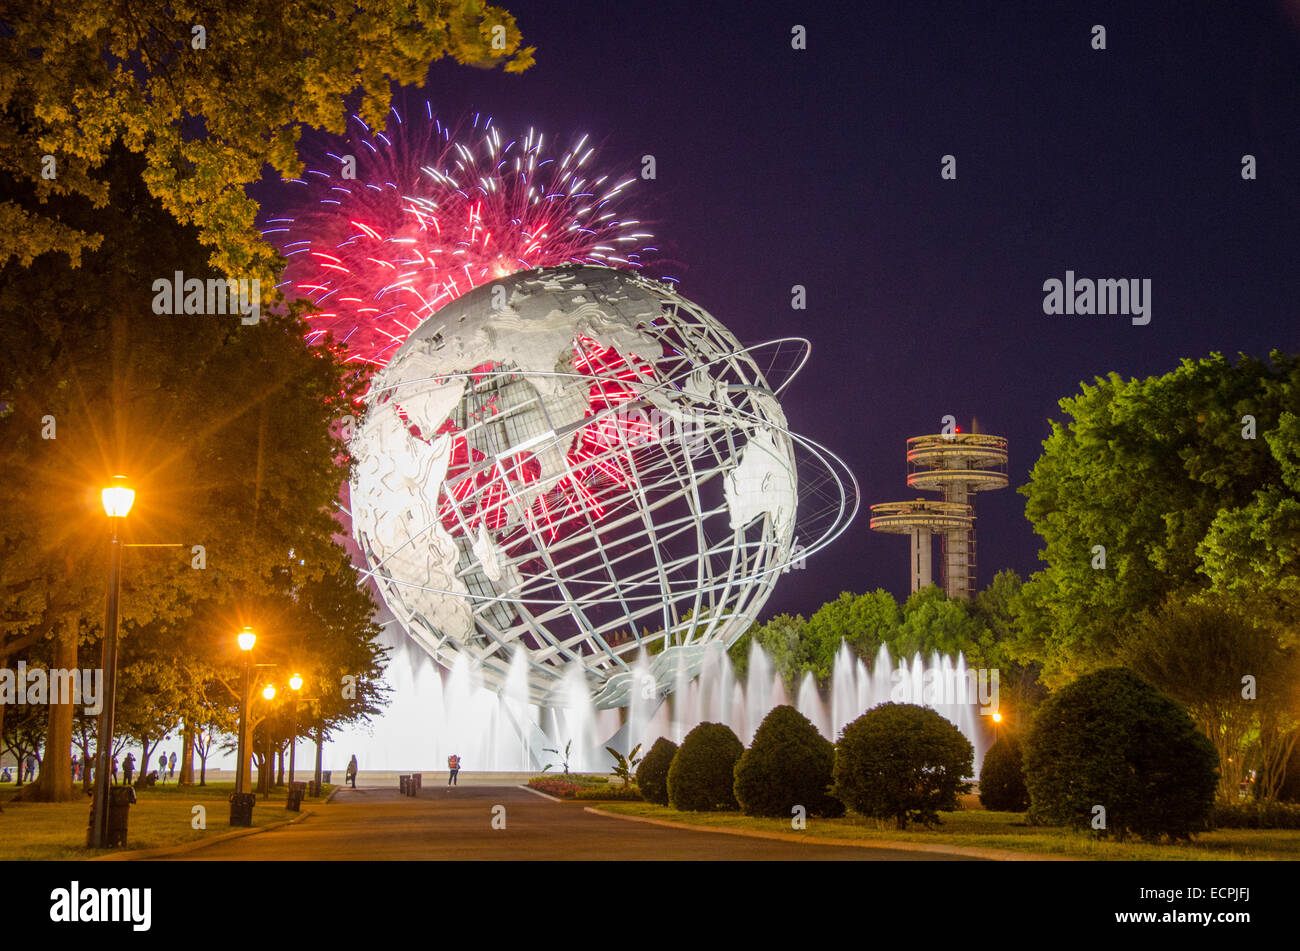 Fireworks explode over Queens' Unisphere in celebration of the 50th Anniversary of the 1964 World's Fair. Stock Photo